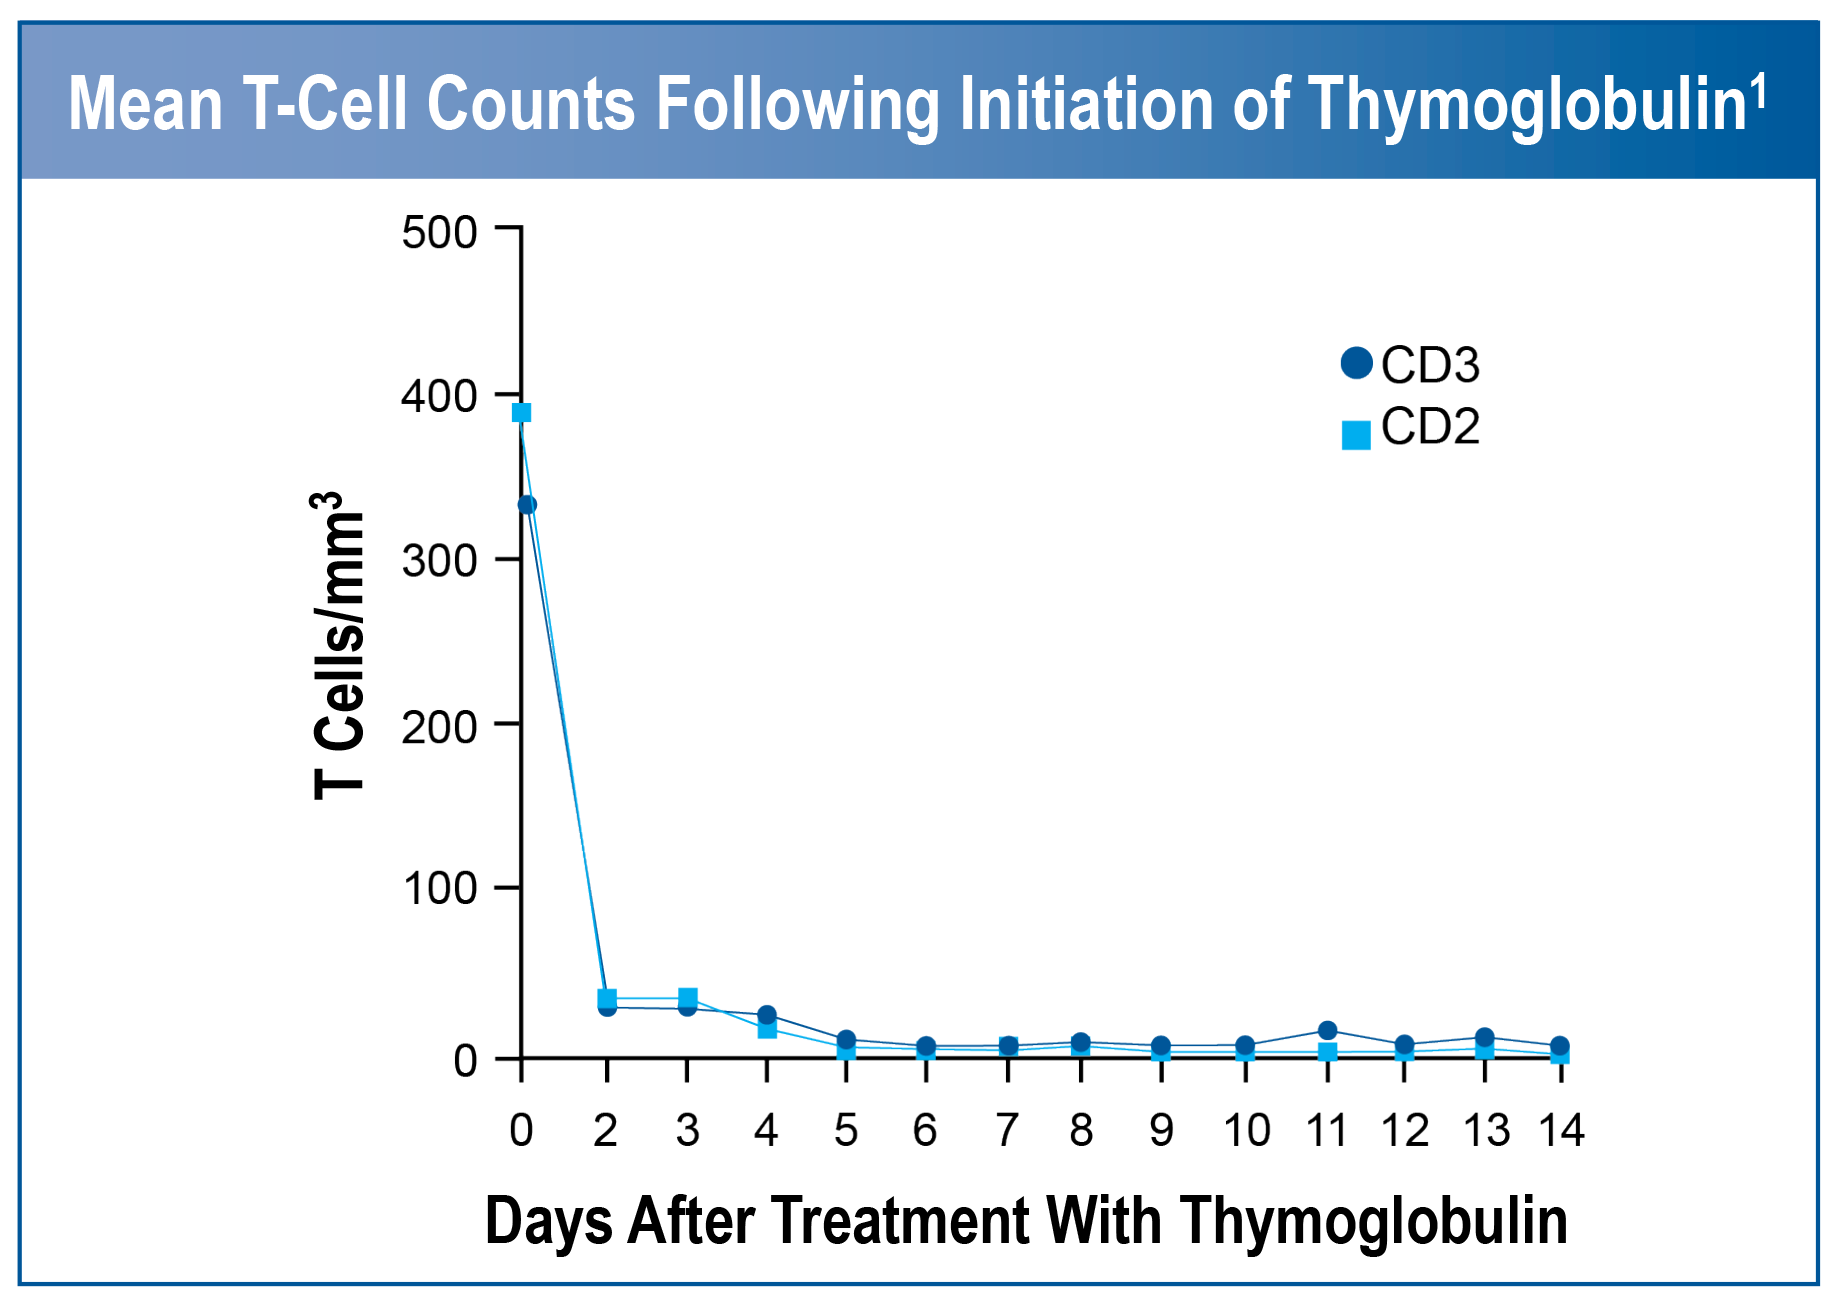 Graph showing mean T-cell counts following initiation of Thymoglobulin therapy